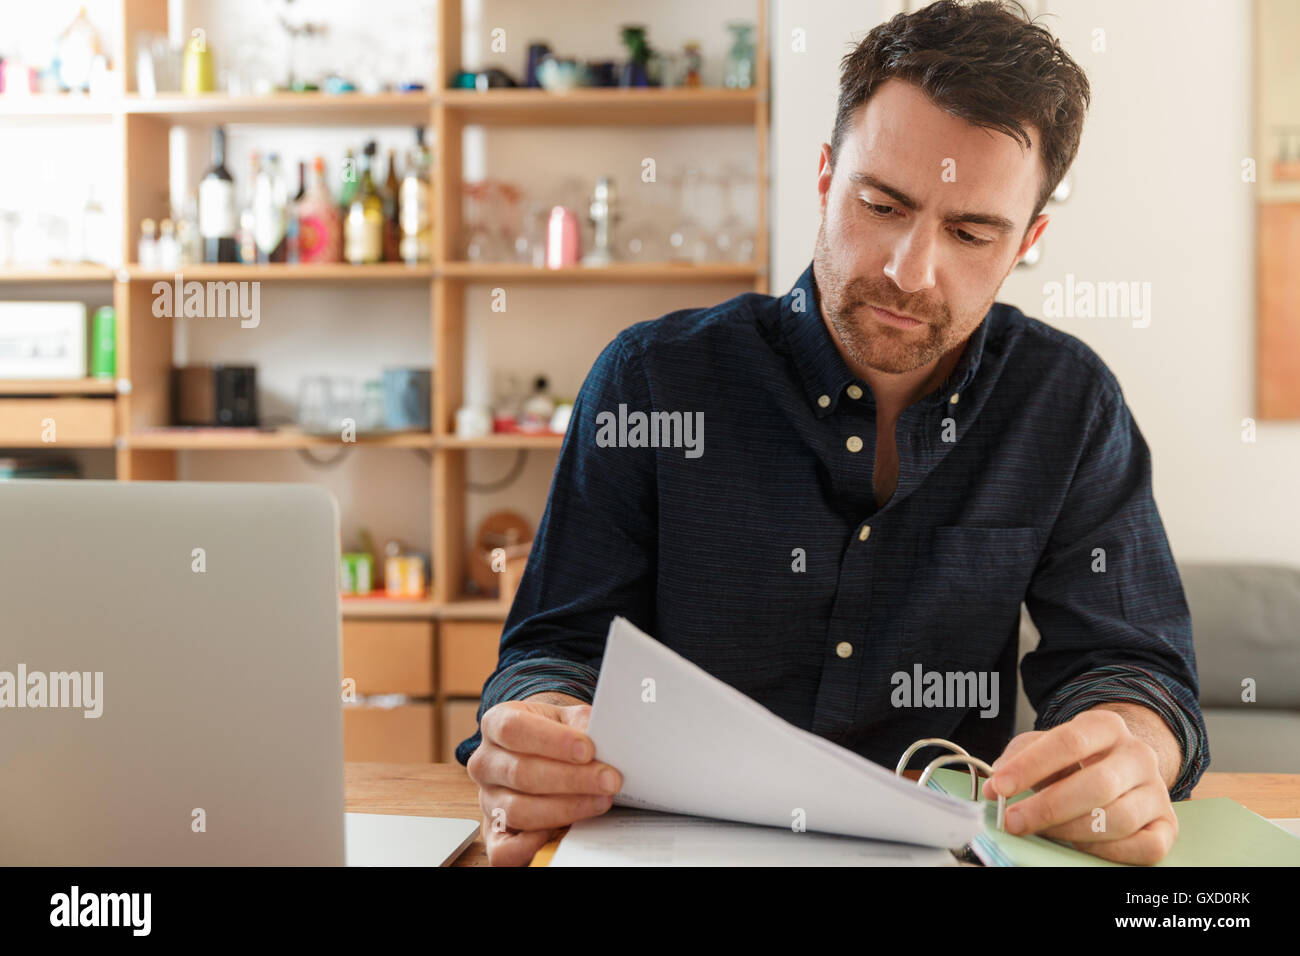 Man with laptop looking at paperwork Stock Photo